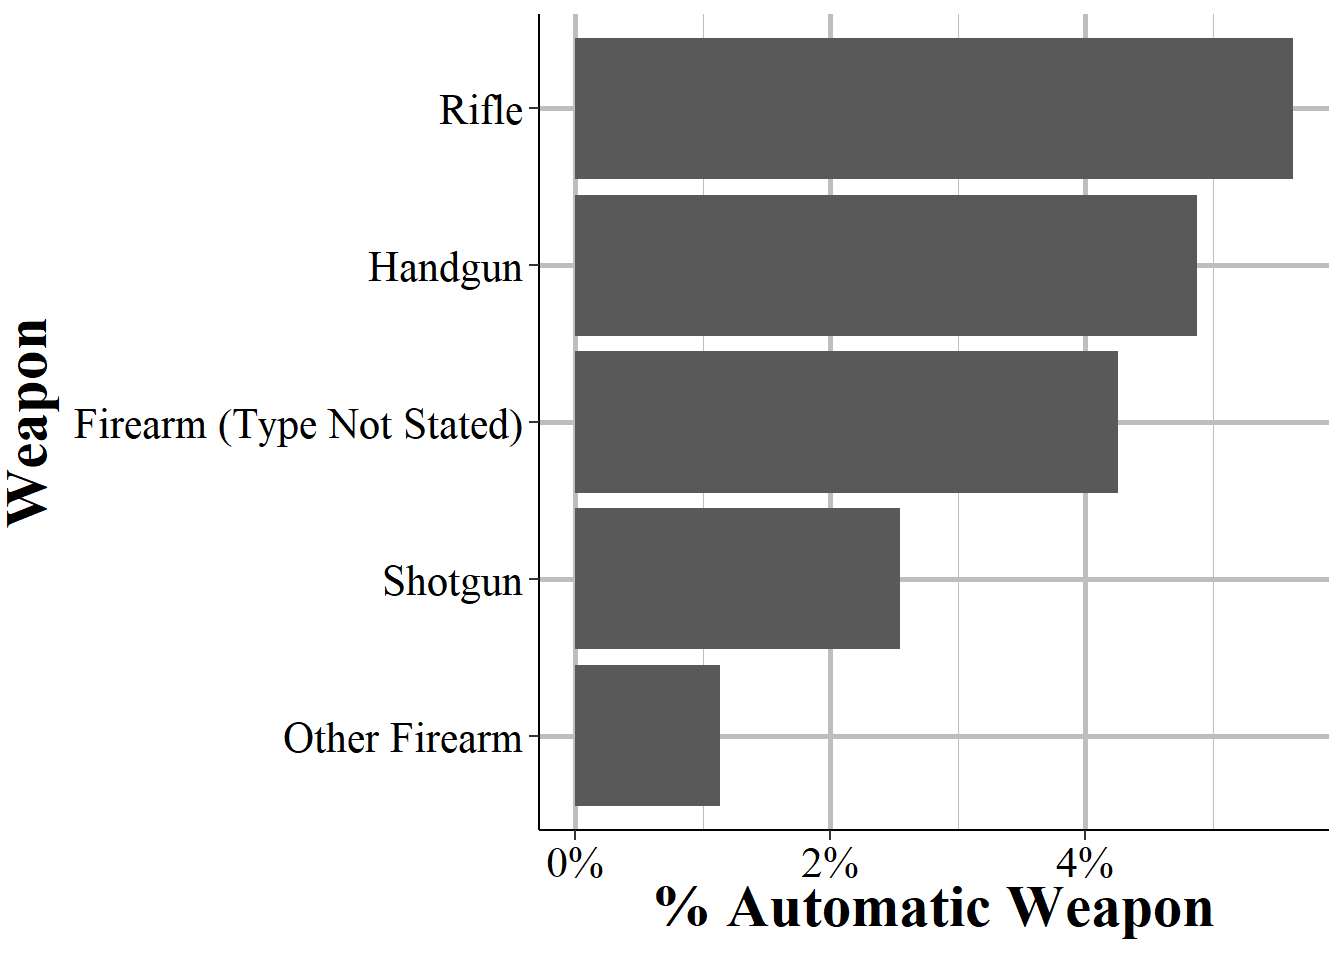 The percent of firearms the arrestee was carrying that were fully automatic, for arrestees in 2019.